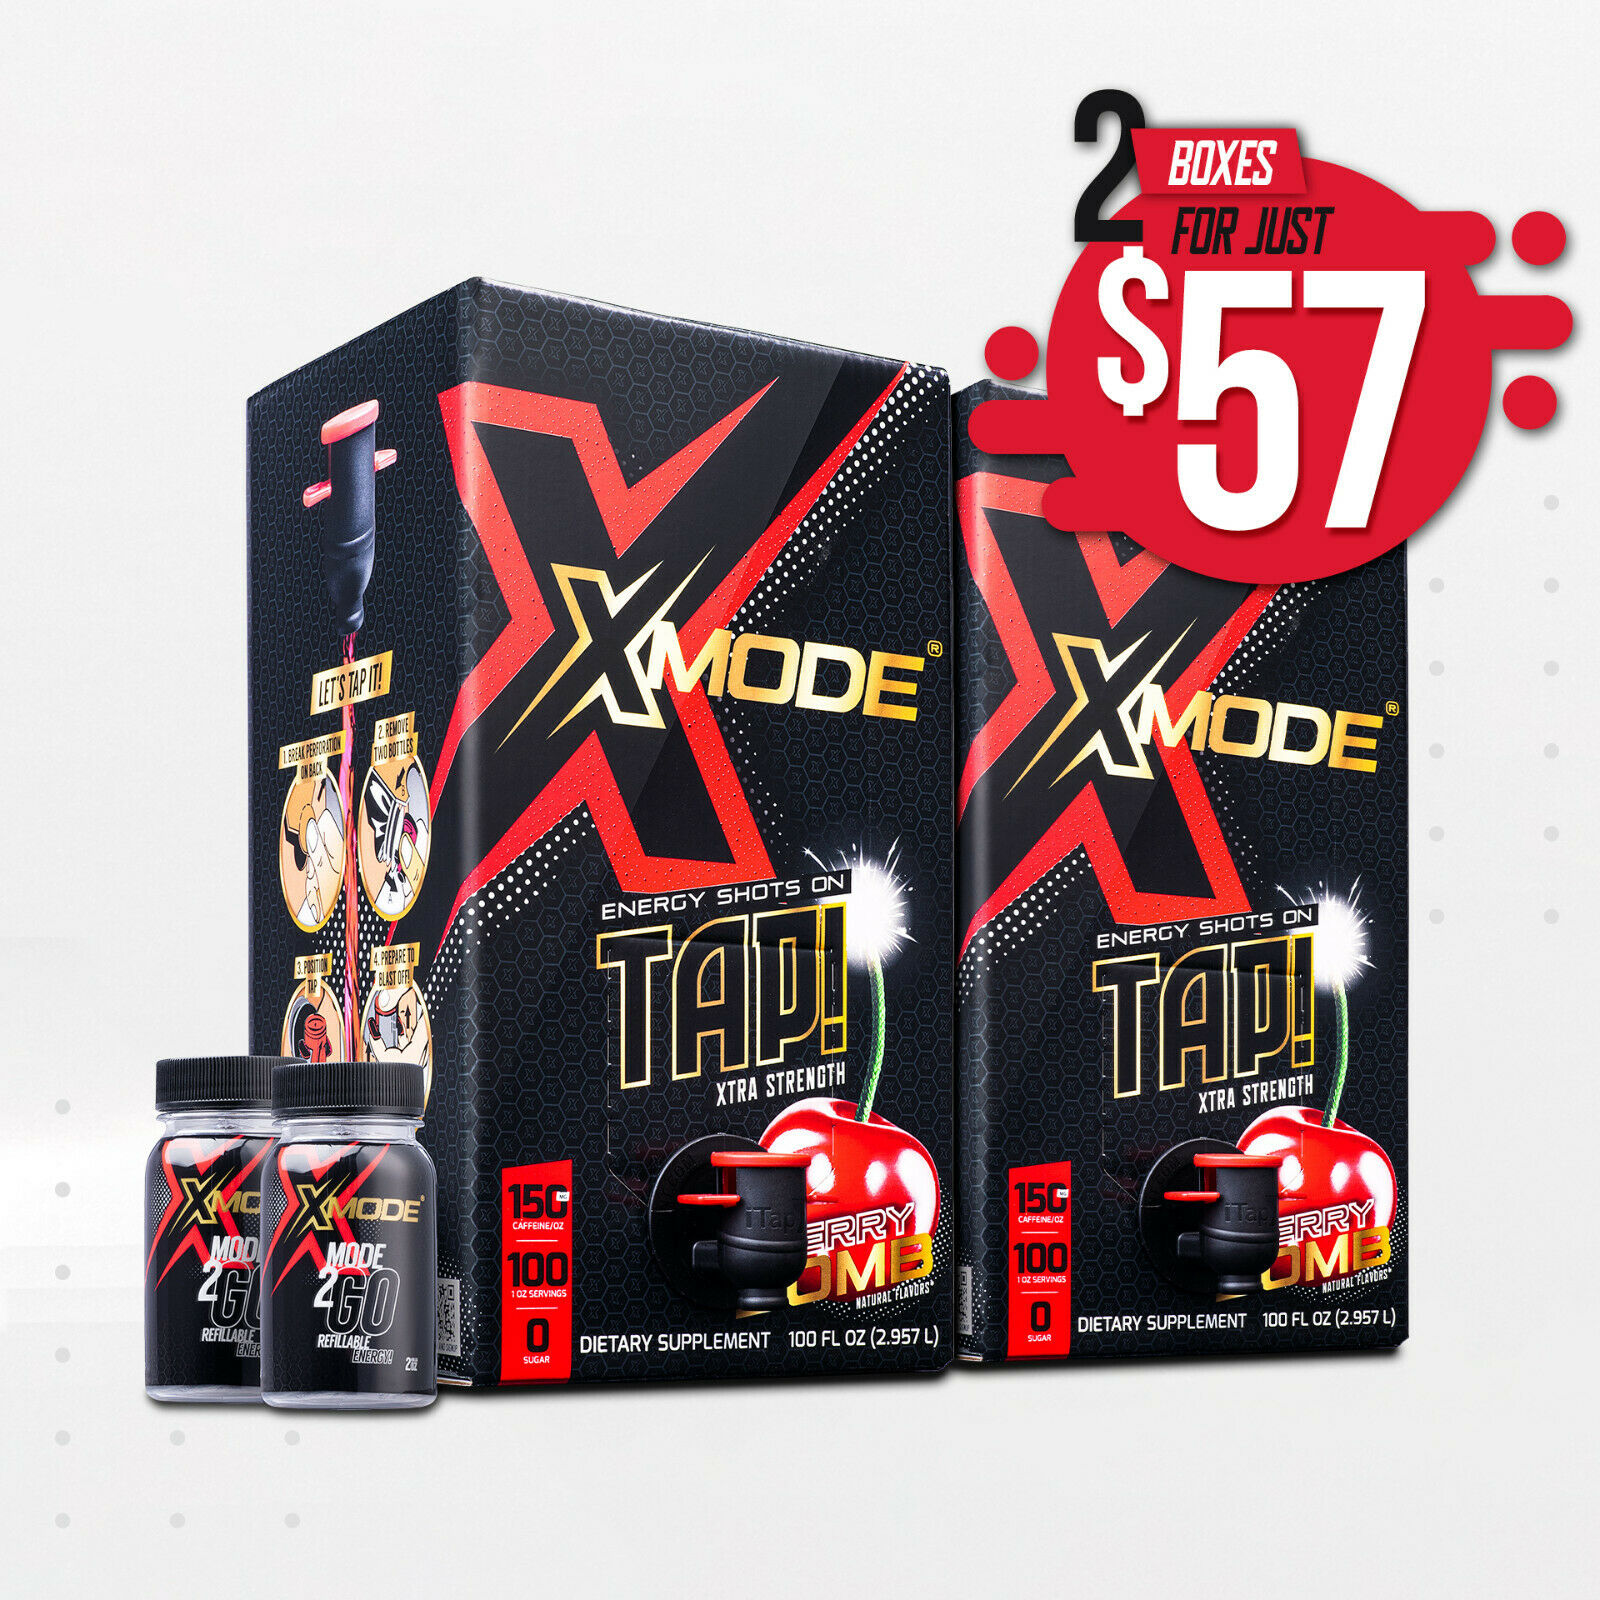 X-mode Energy Shots On Tap!  (cherry Double Box - 200 Servings For $57)